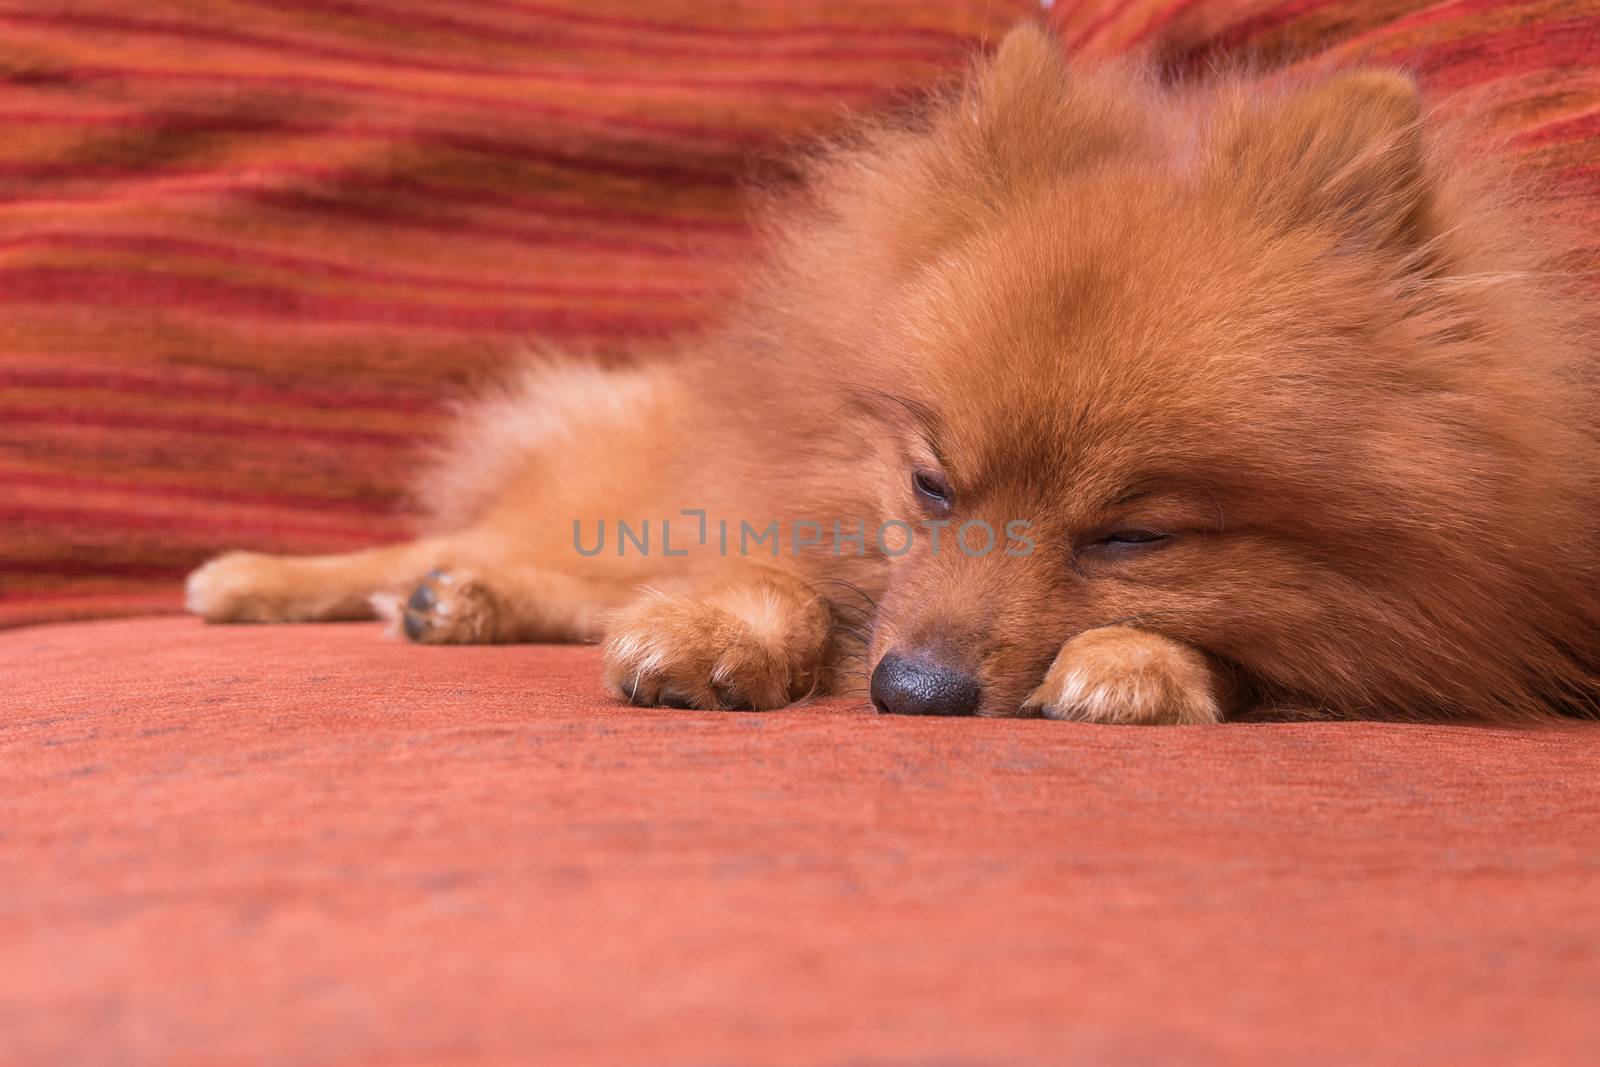 Pomeranian dog in hair shed period, sleeping on the sofa/focus o by Soranop01